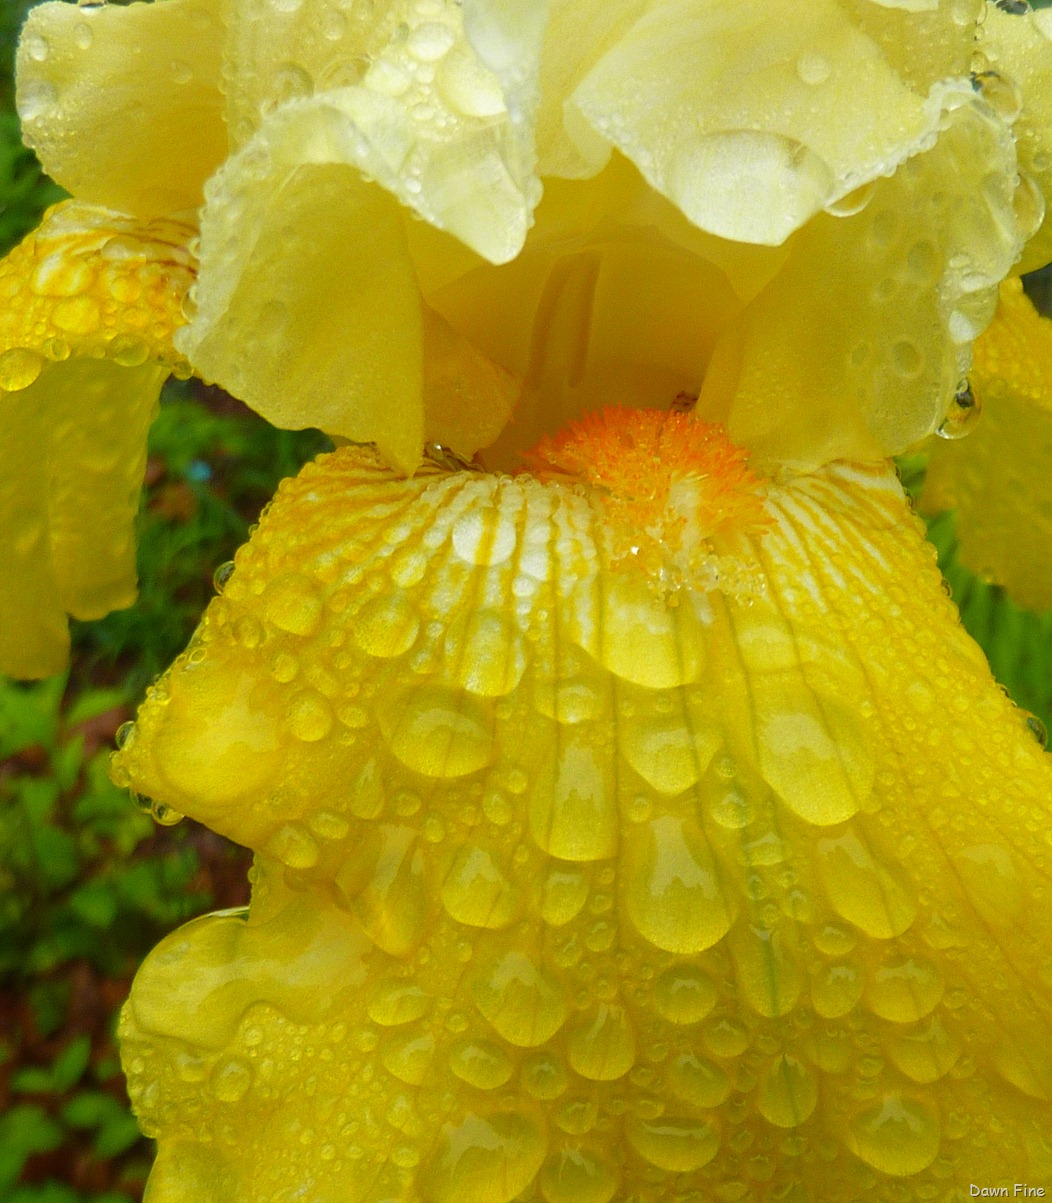 [Water droplets and flowers_091.jpg]